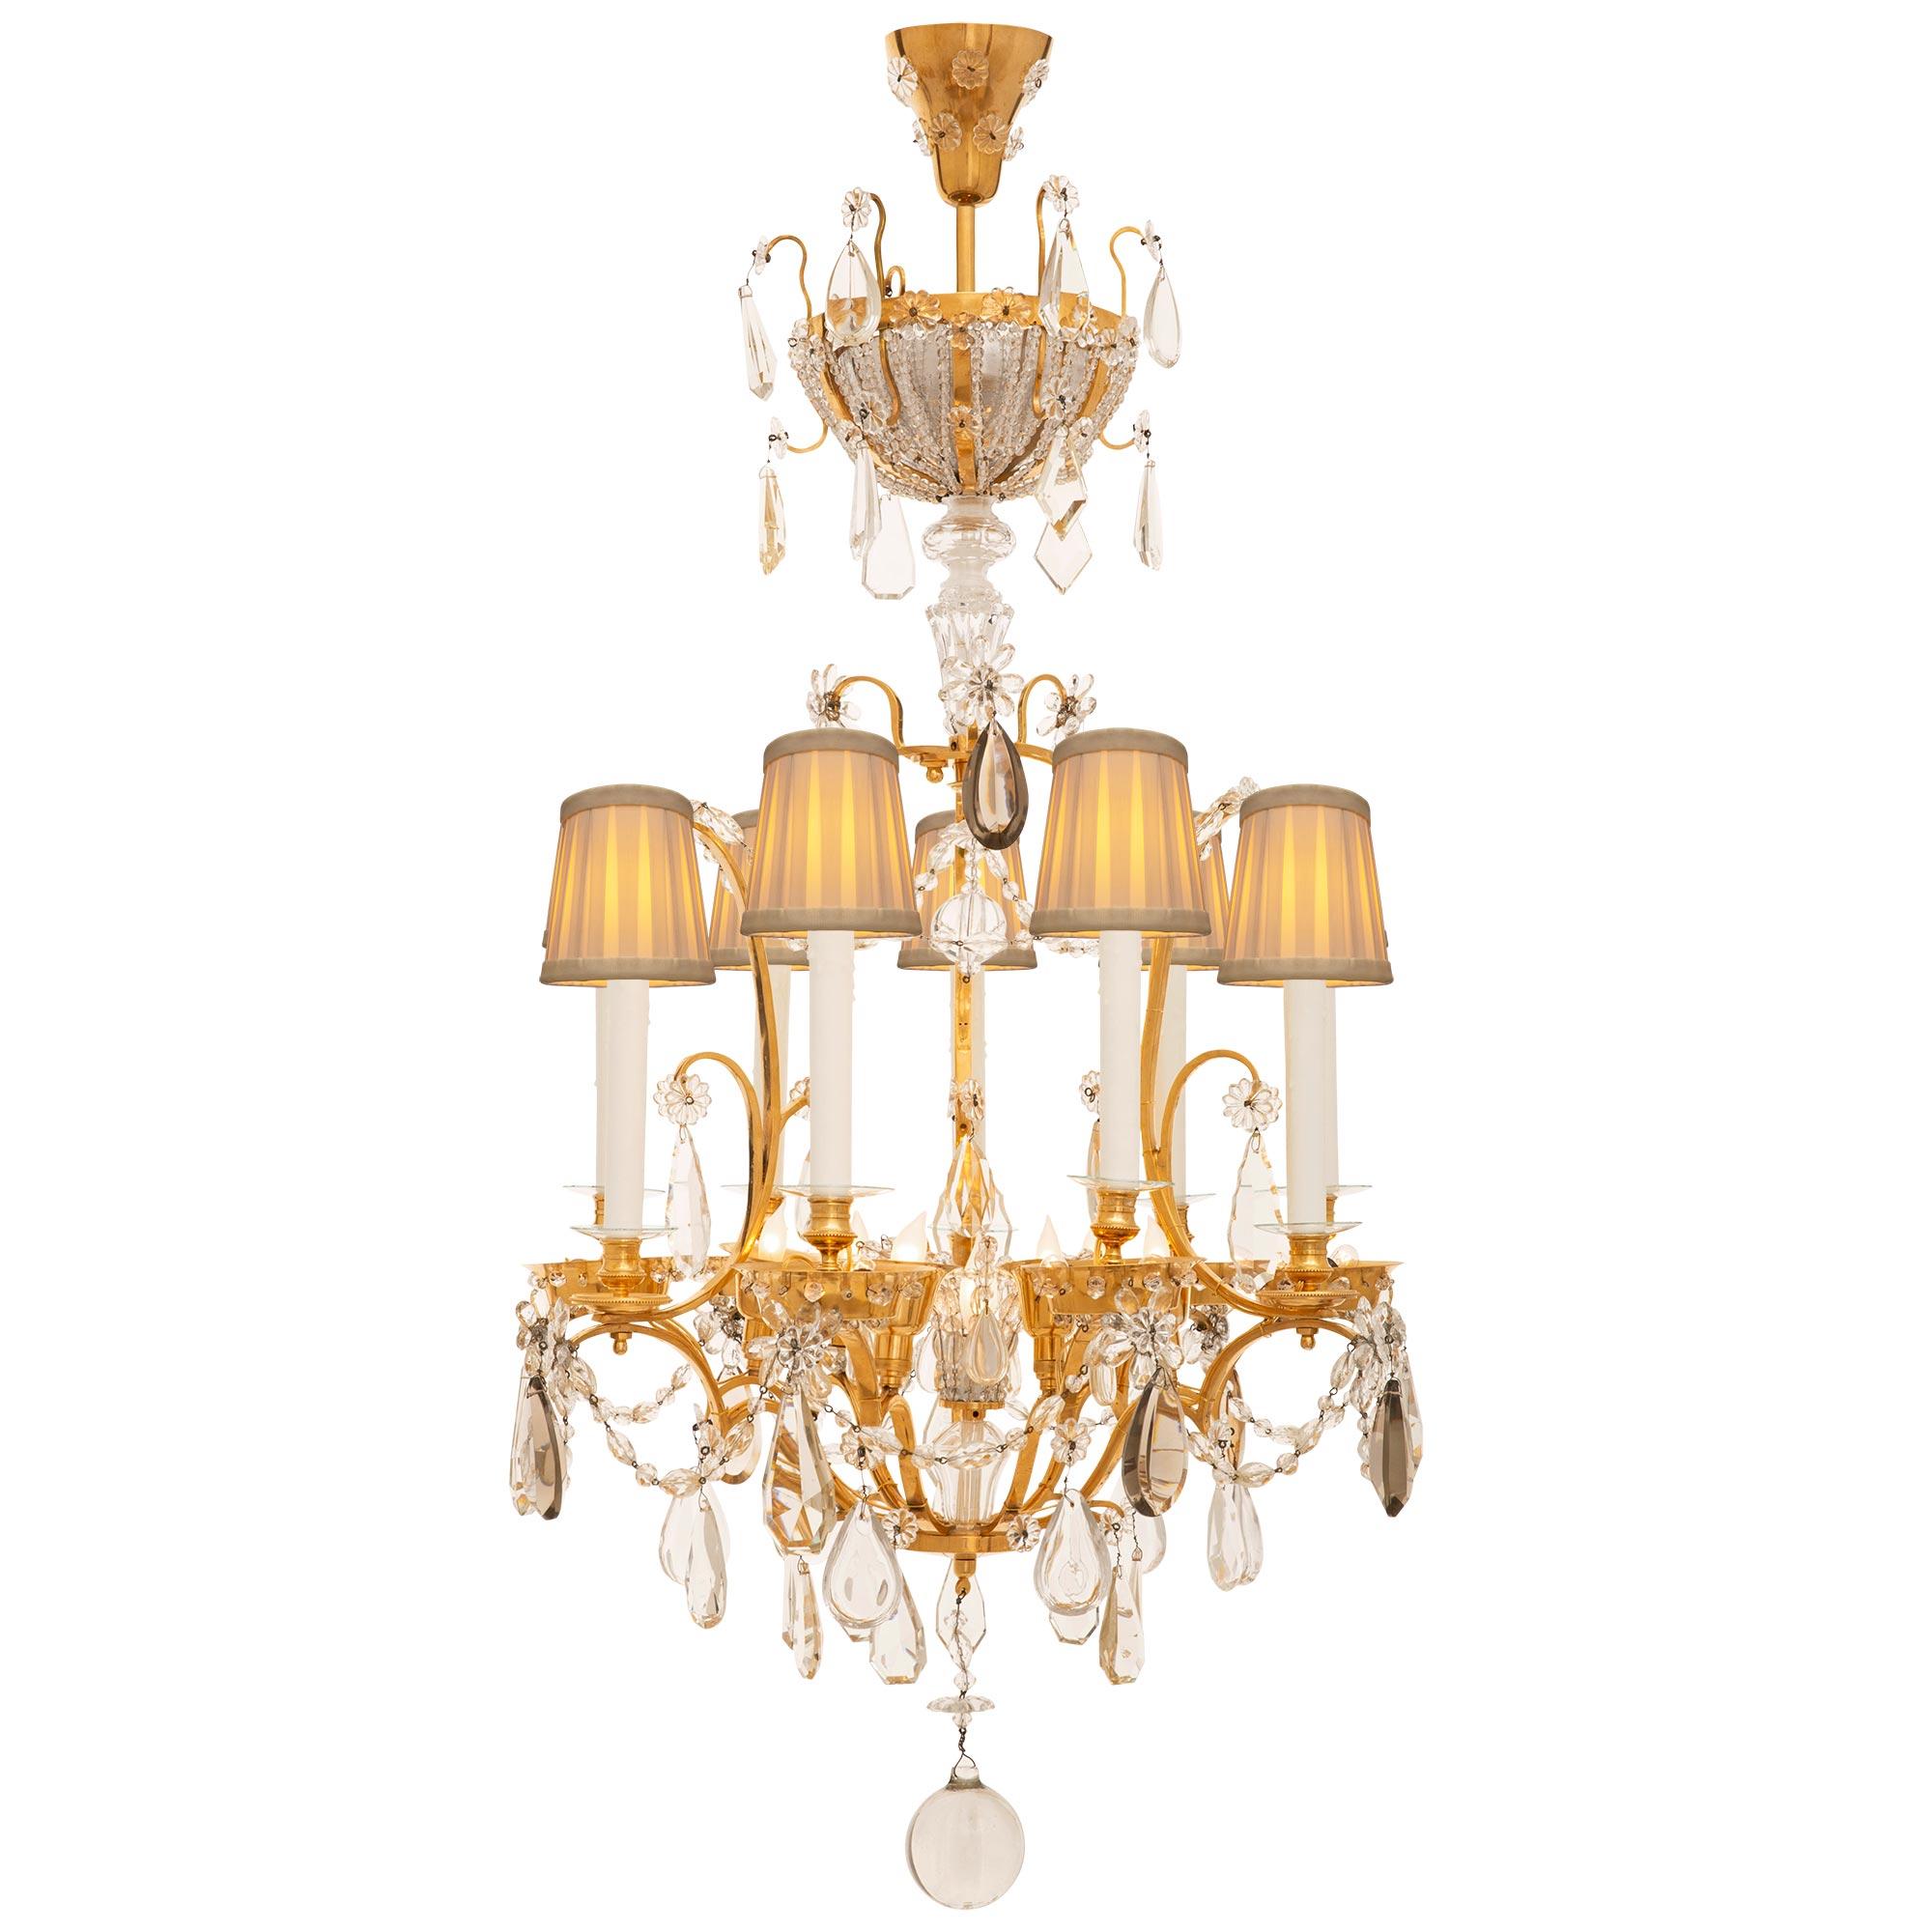 French 19th Century Louis XVI St. Bronze, Ormolu, and Crystal Chandelier For Sale 5